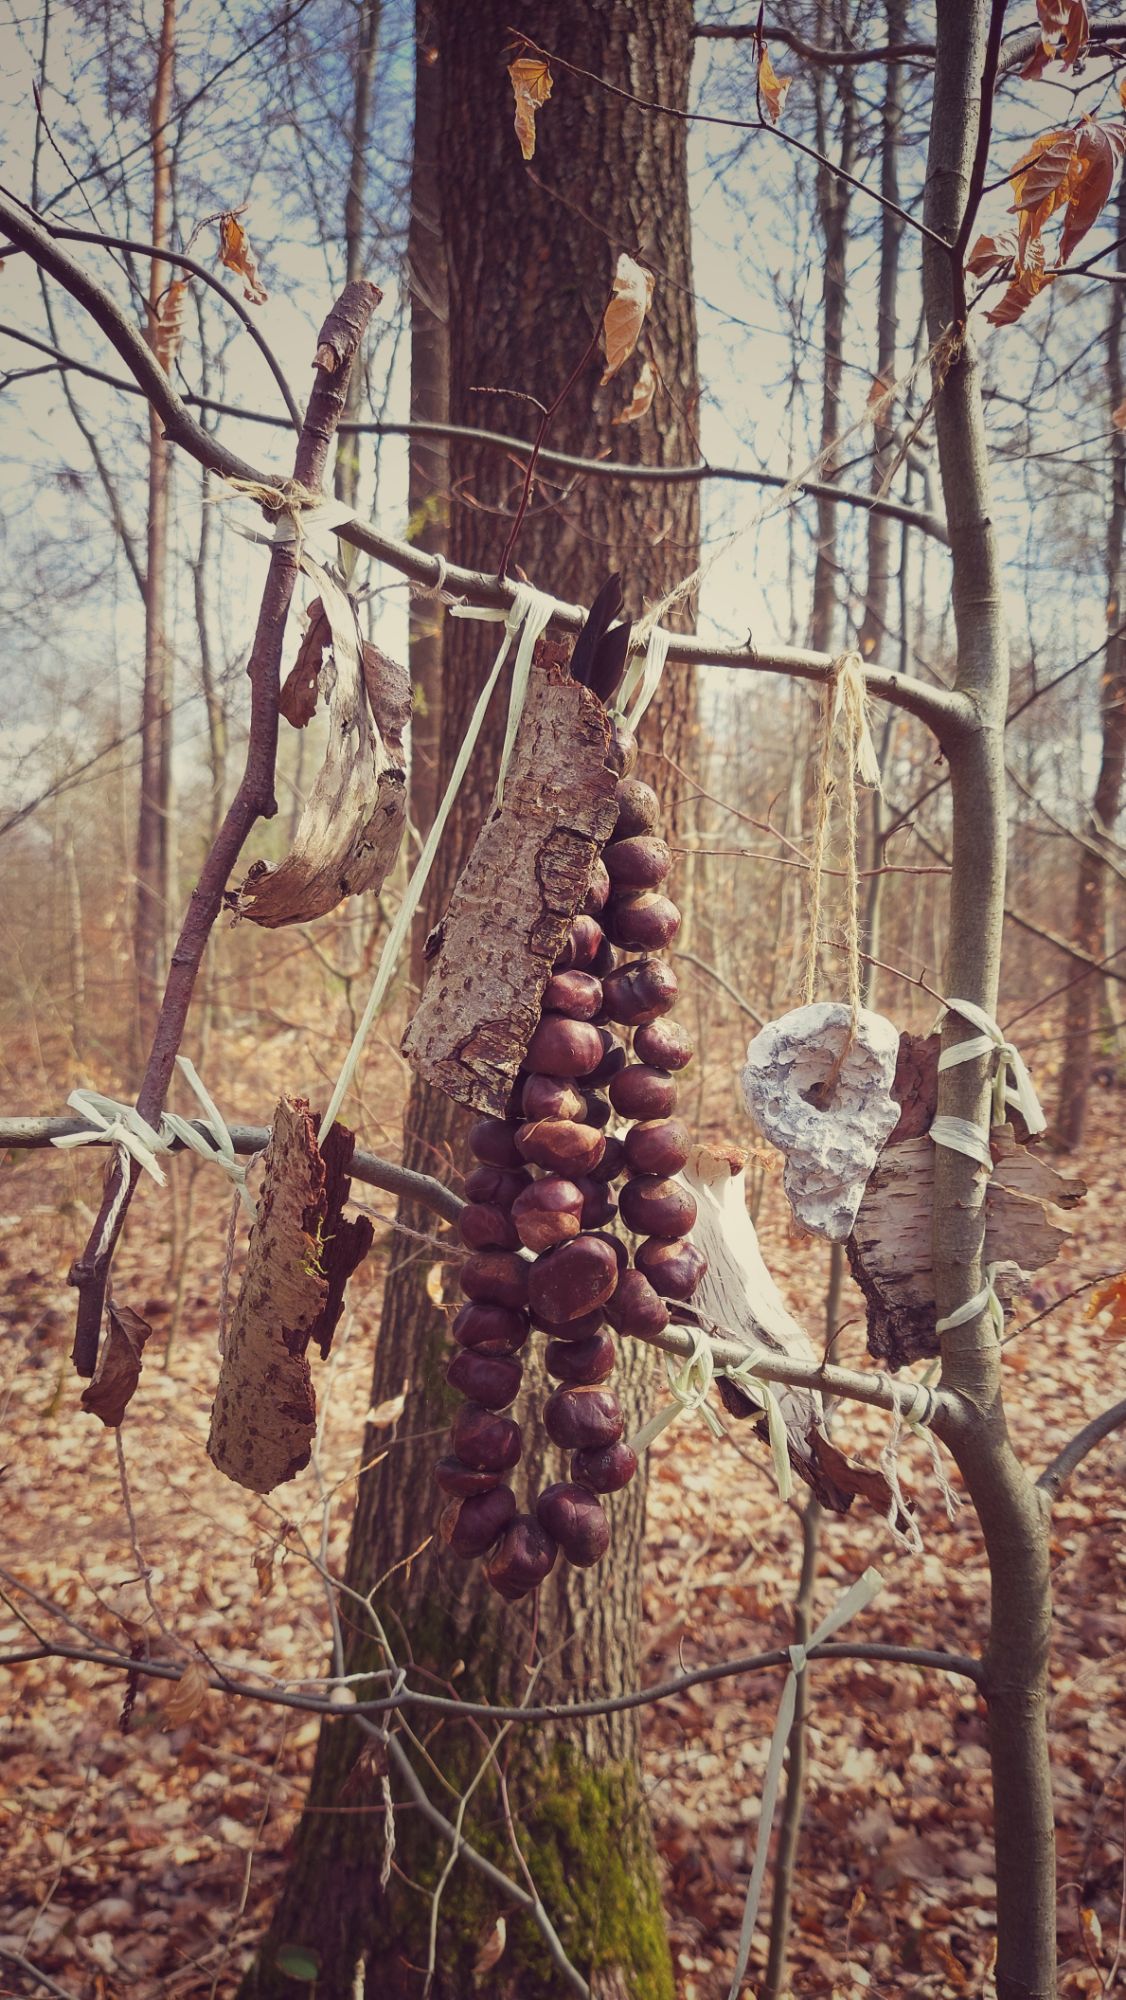 Forest art, chestnuts and stones bound to twigs in a tree.